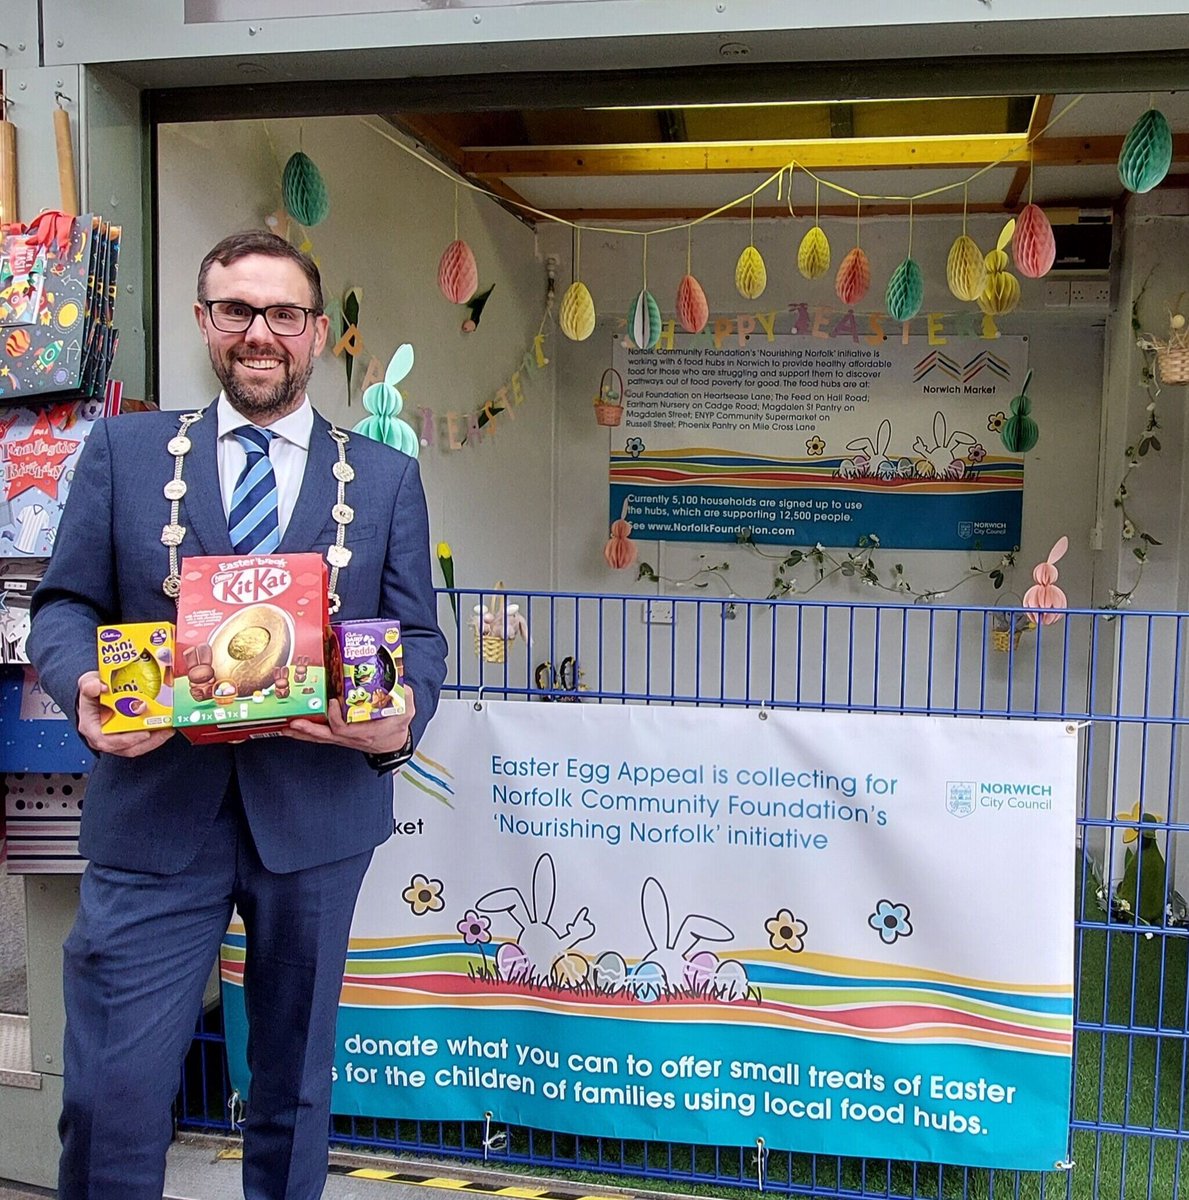 Today the Lord Mayor of Norwich, Cllr James Wright, dropped off his contribution to Norwich Market's pop-up stall 132. Norwich Market is hoping to fill the stall with Easter egg donations for families in Norwich in time for Easter via the Norfolk Community Foundation’s Nourishi